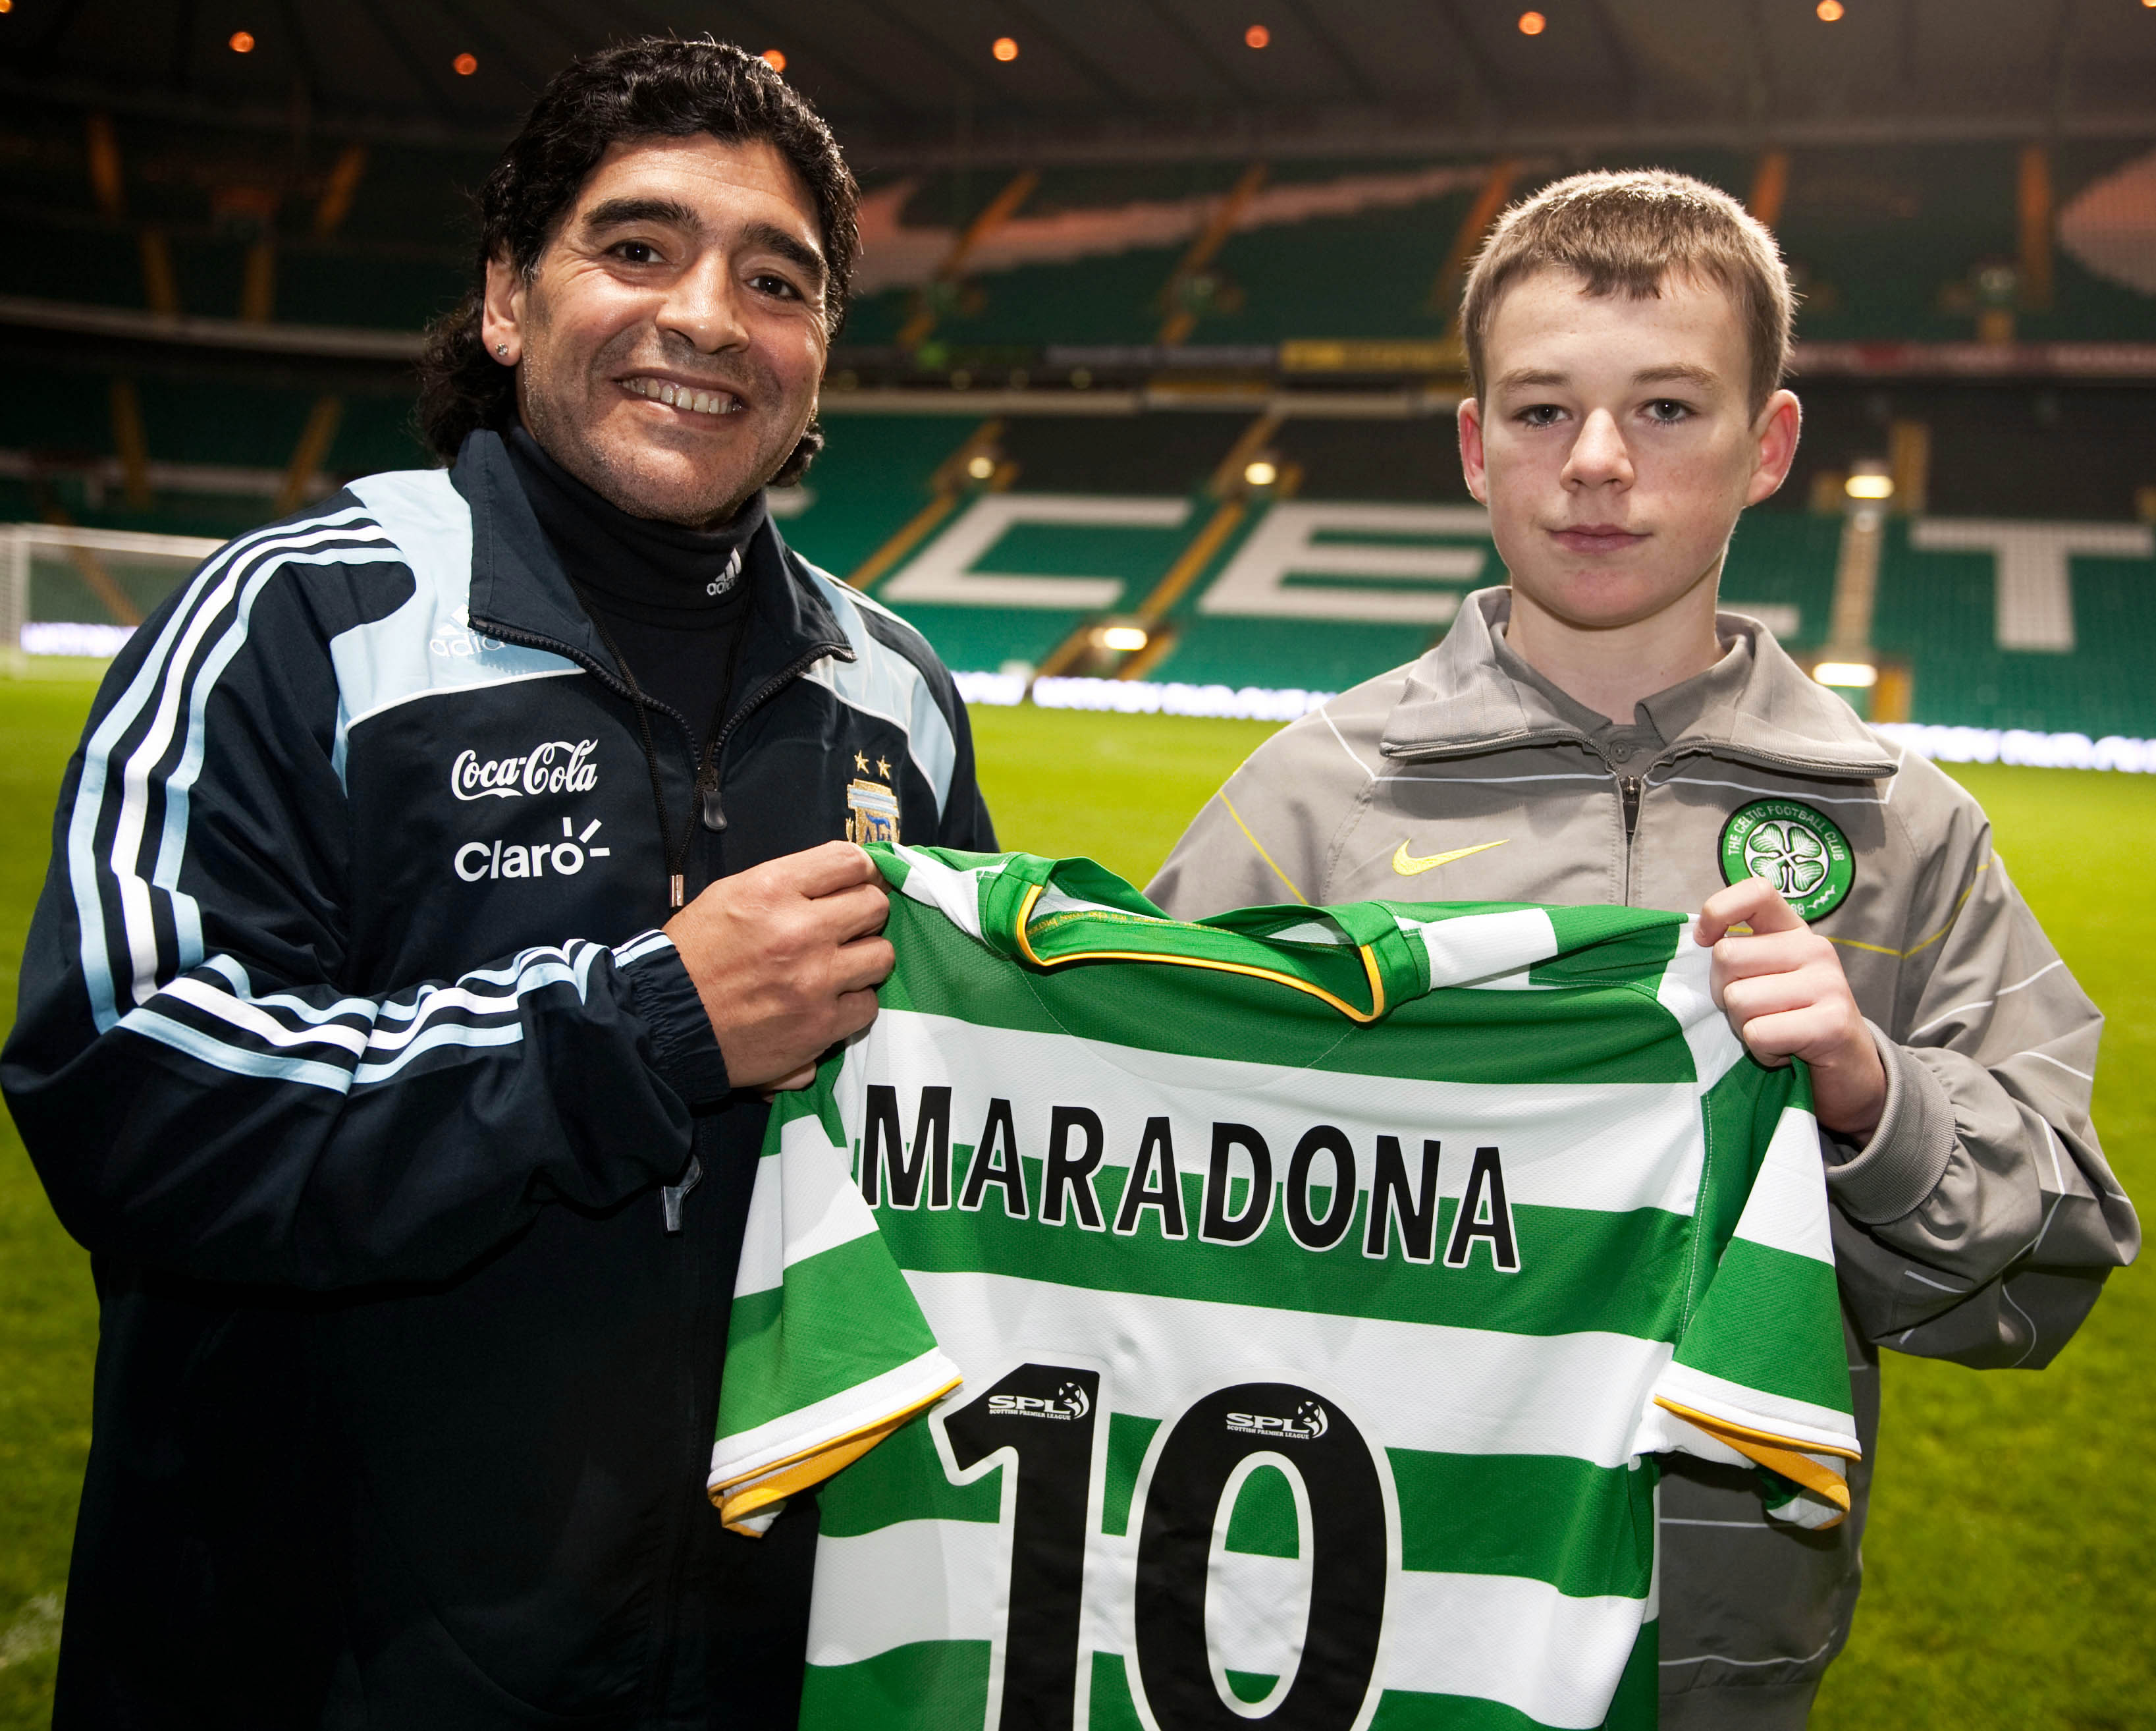 Ball boy Adam Brown, 13, received a special gift from then-Argentina manager Maradona as his squad trained at Celtic Park before a friendly with Scotland.